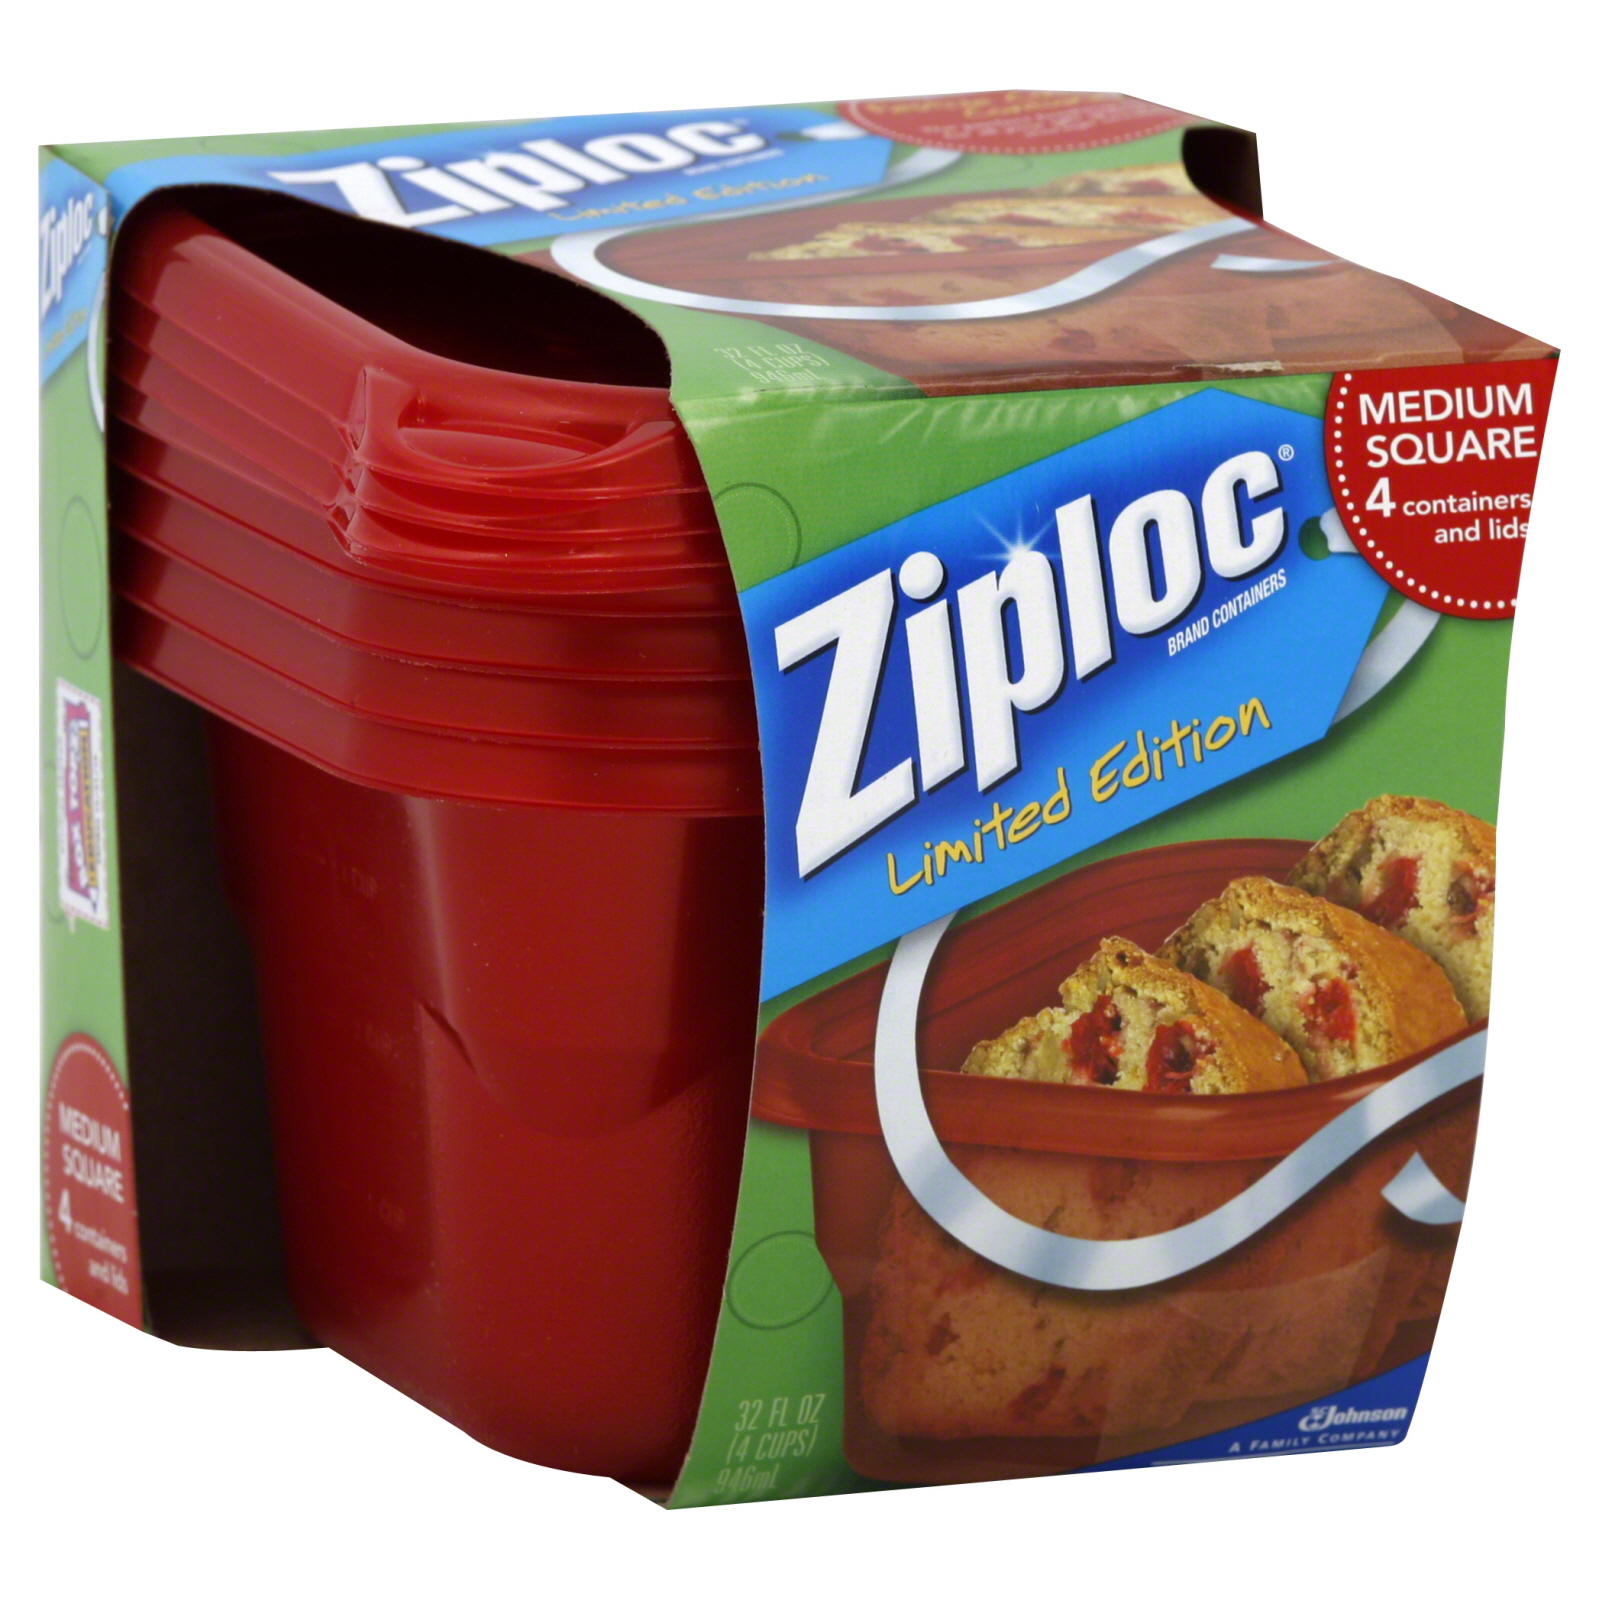 Ziploc Twist N Loc Containers & Lids, Round, Medium, 2 sets   Food & Grocery   Food Storage   Containers